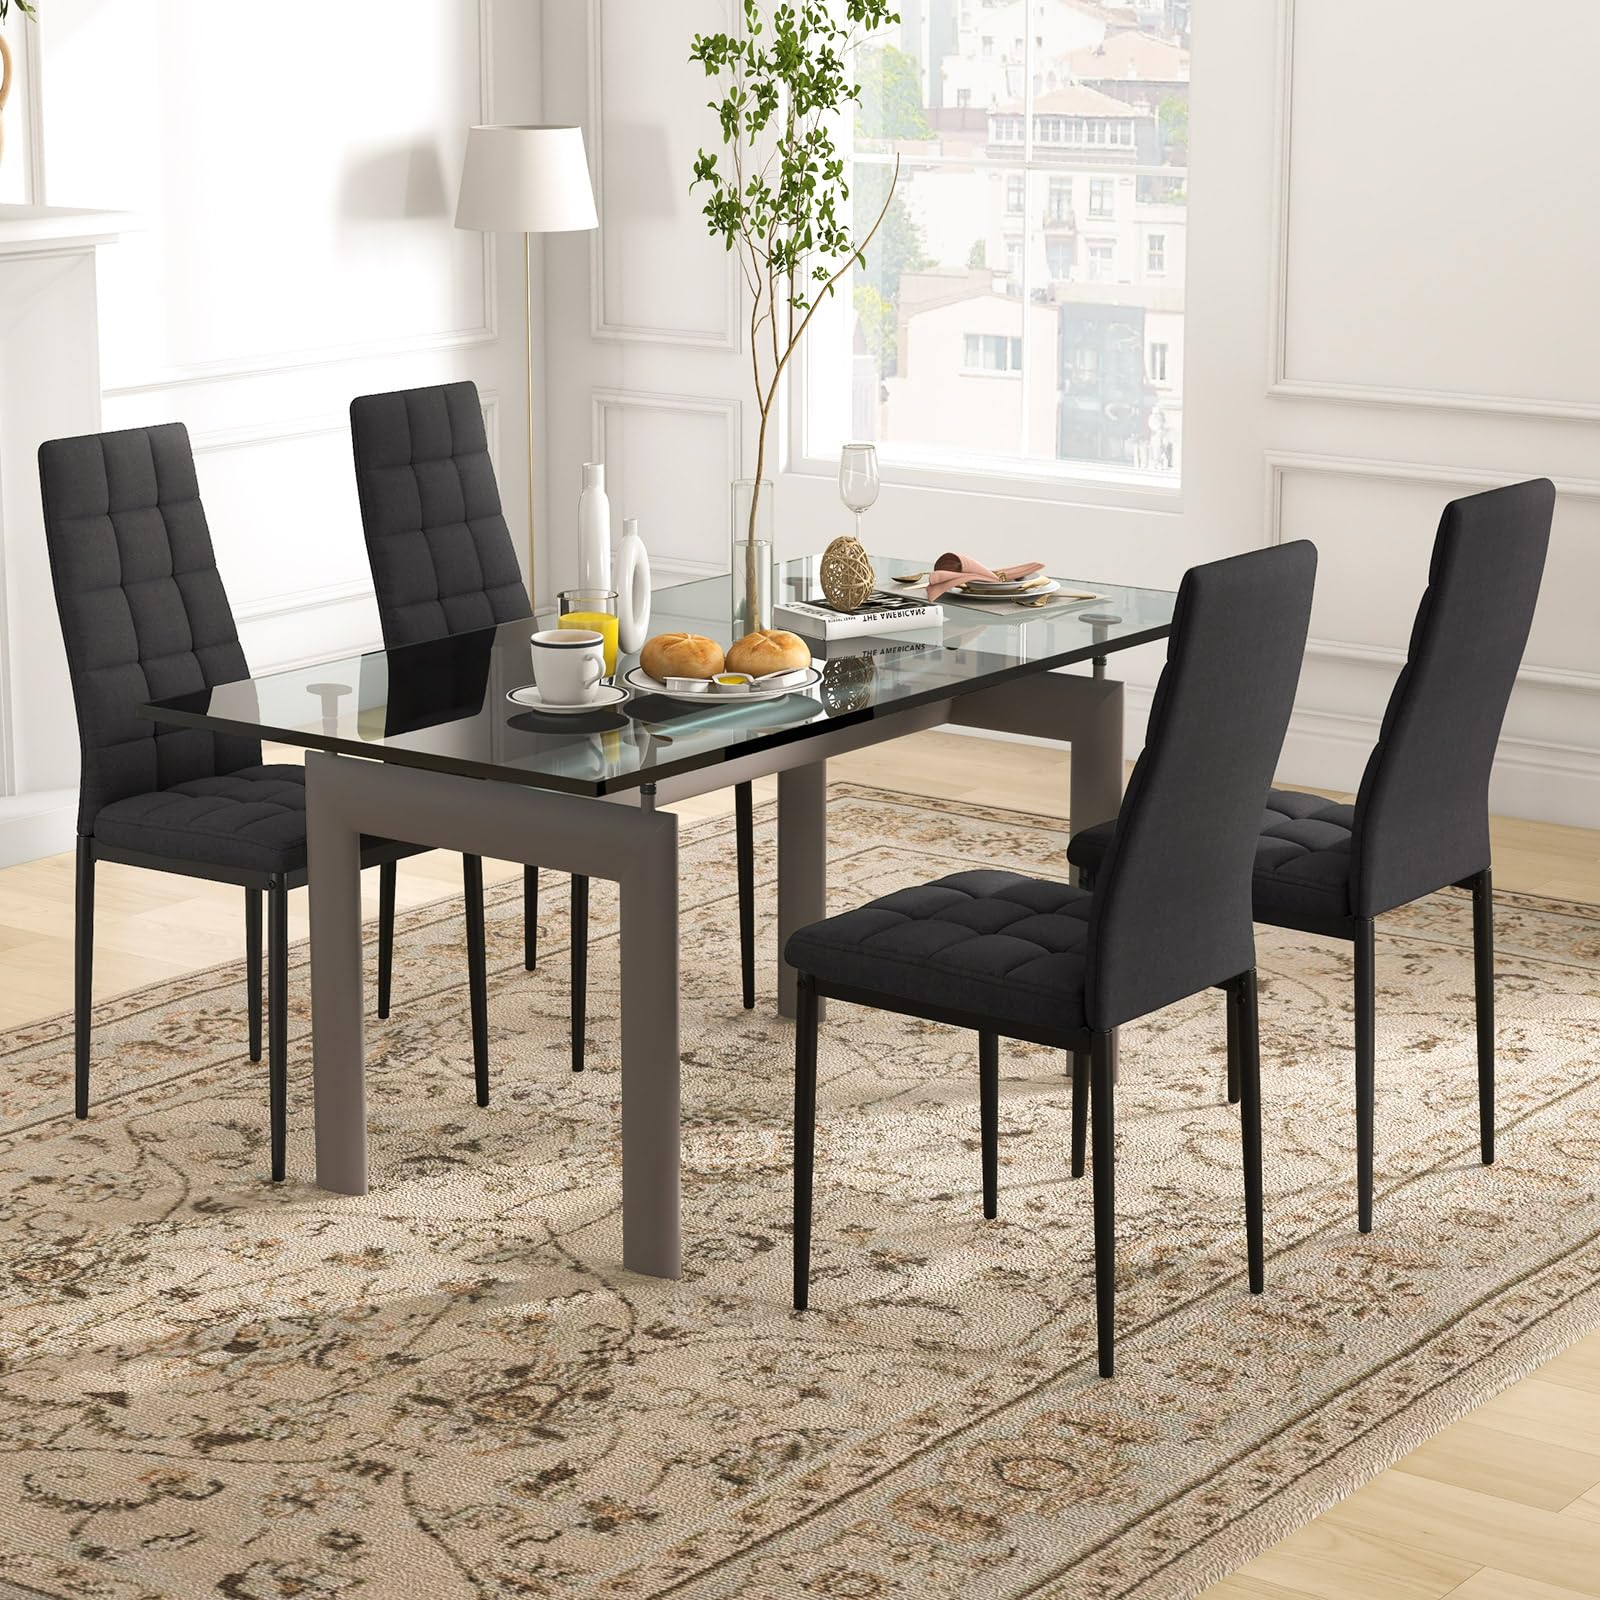 Giantex Dining Chairs Set of 4 Black